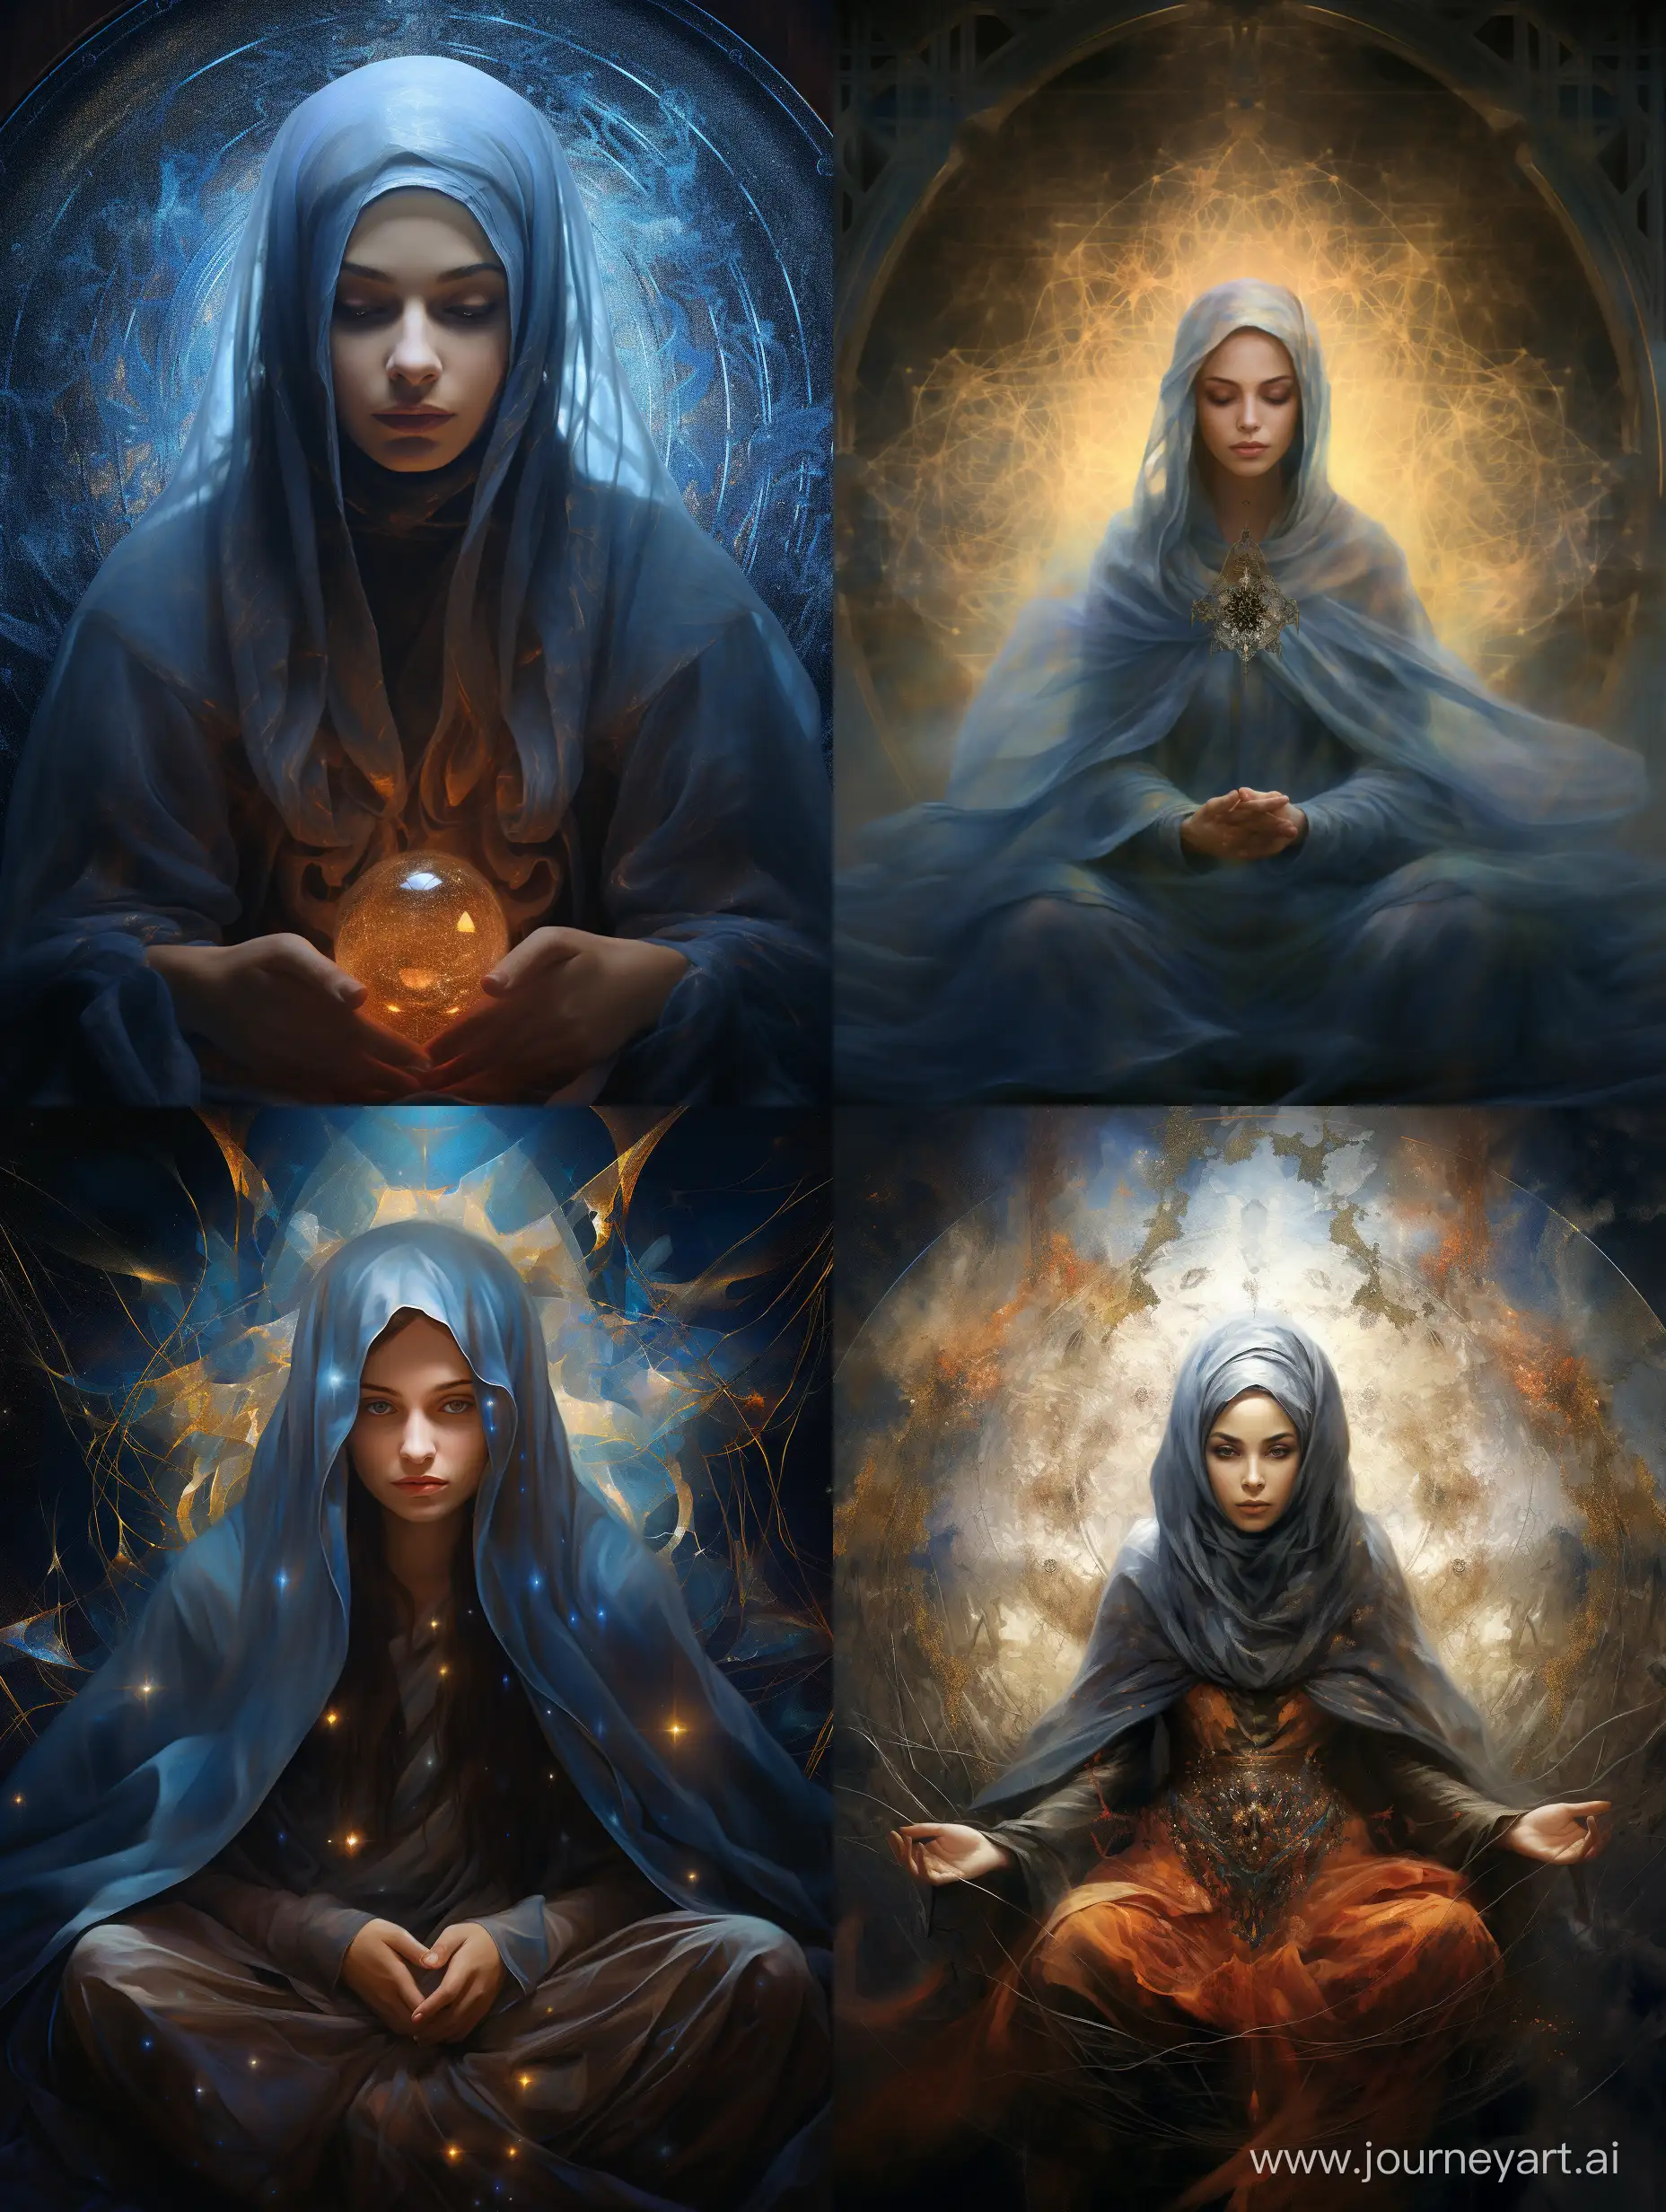 meditation in motion, wearing hijab, on background mystical art